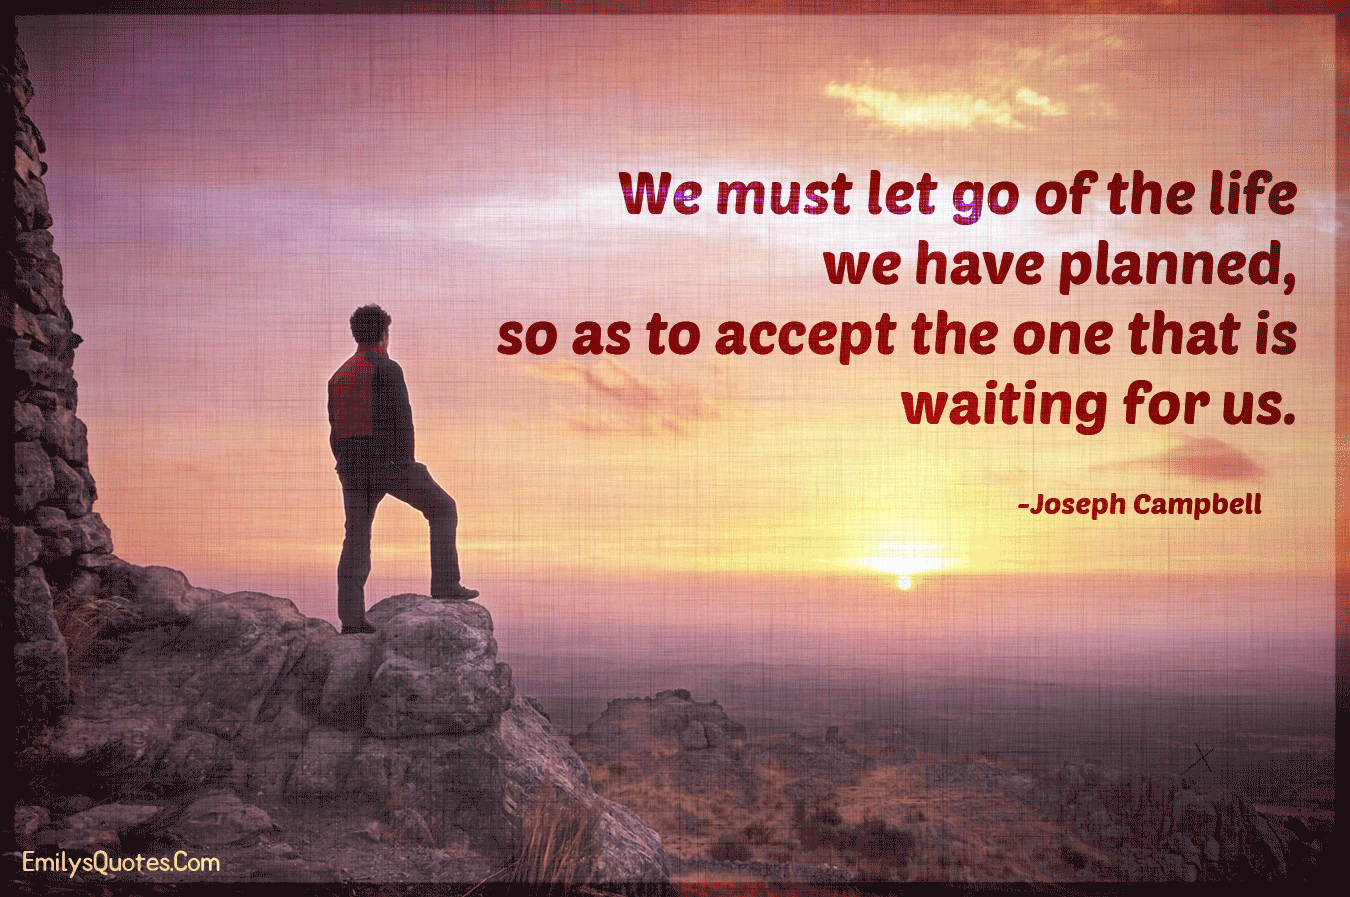 We must let go of the life we have planned, so as to accept the one